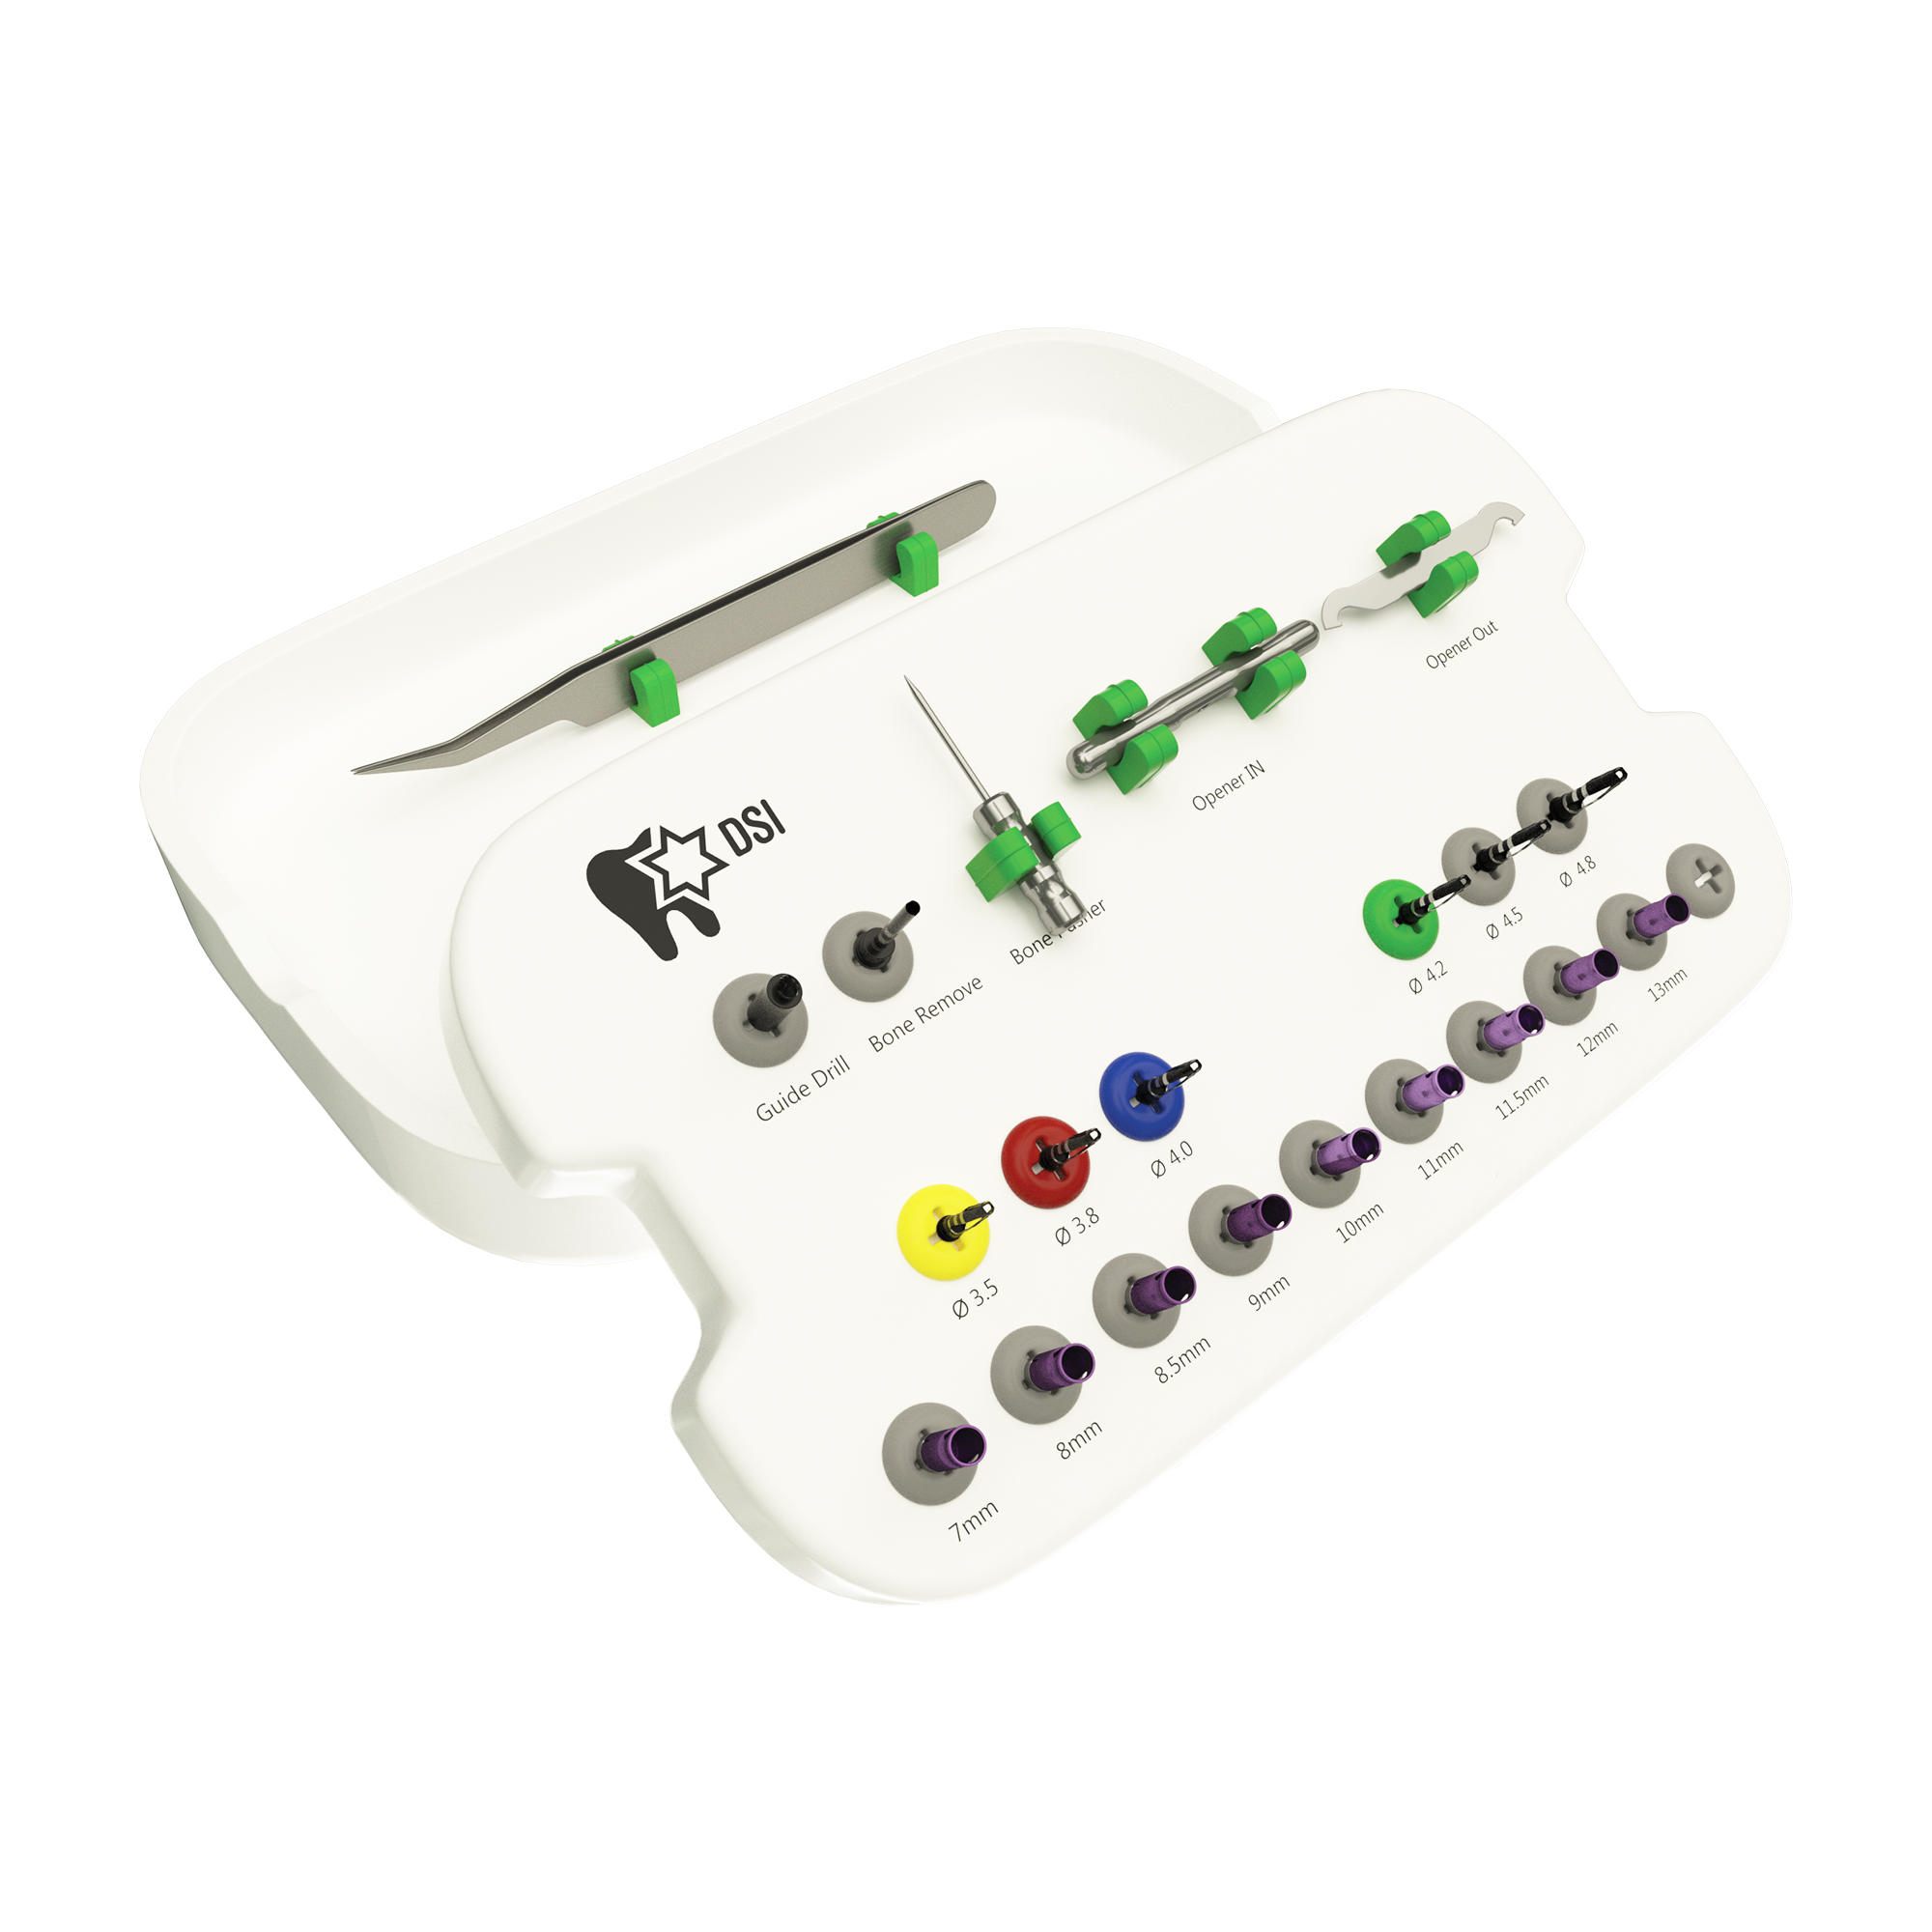 DSI One Drilling System Kit For Implant Osteotomy Preparation